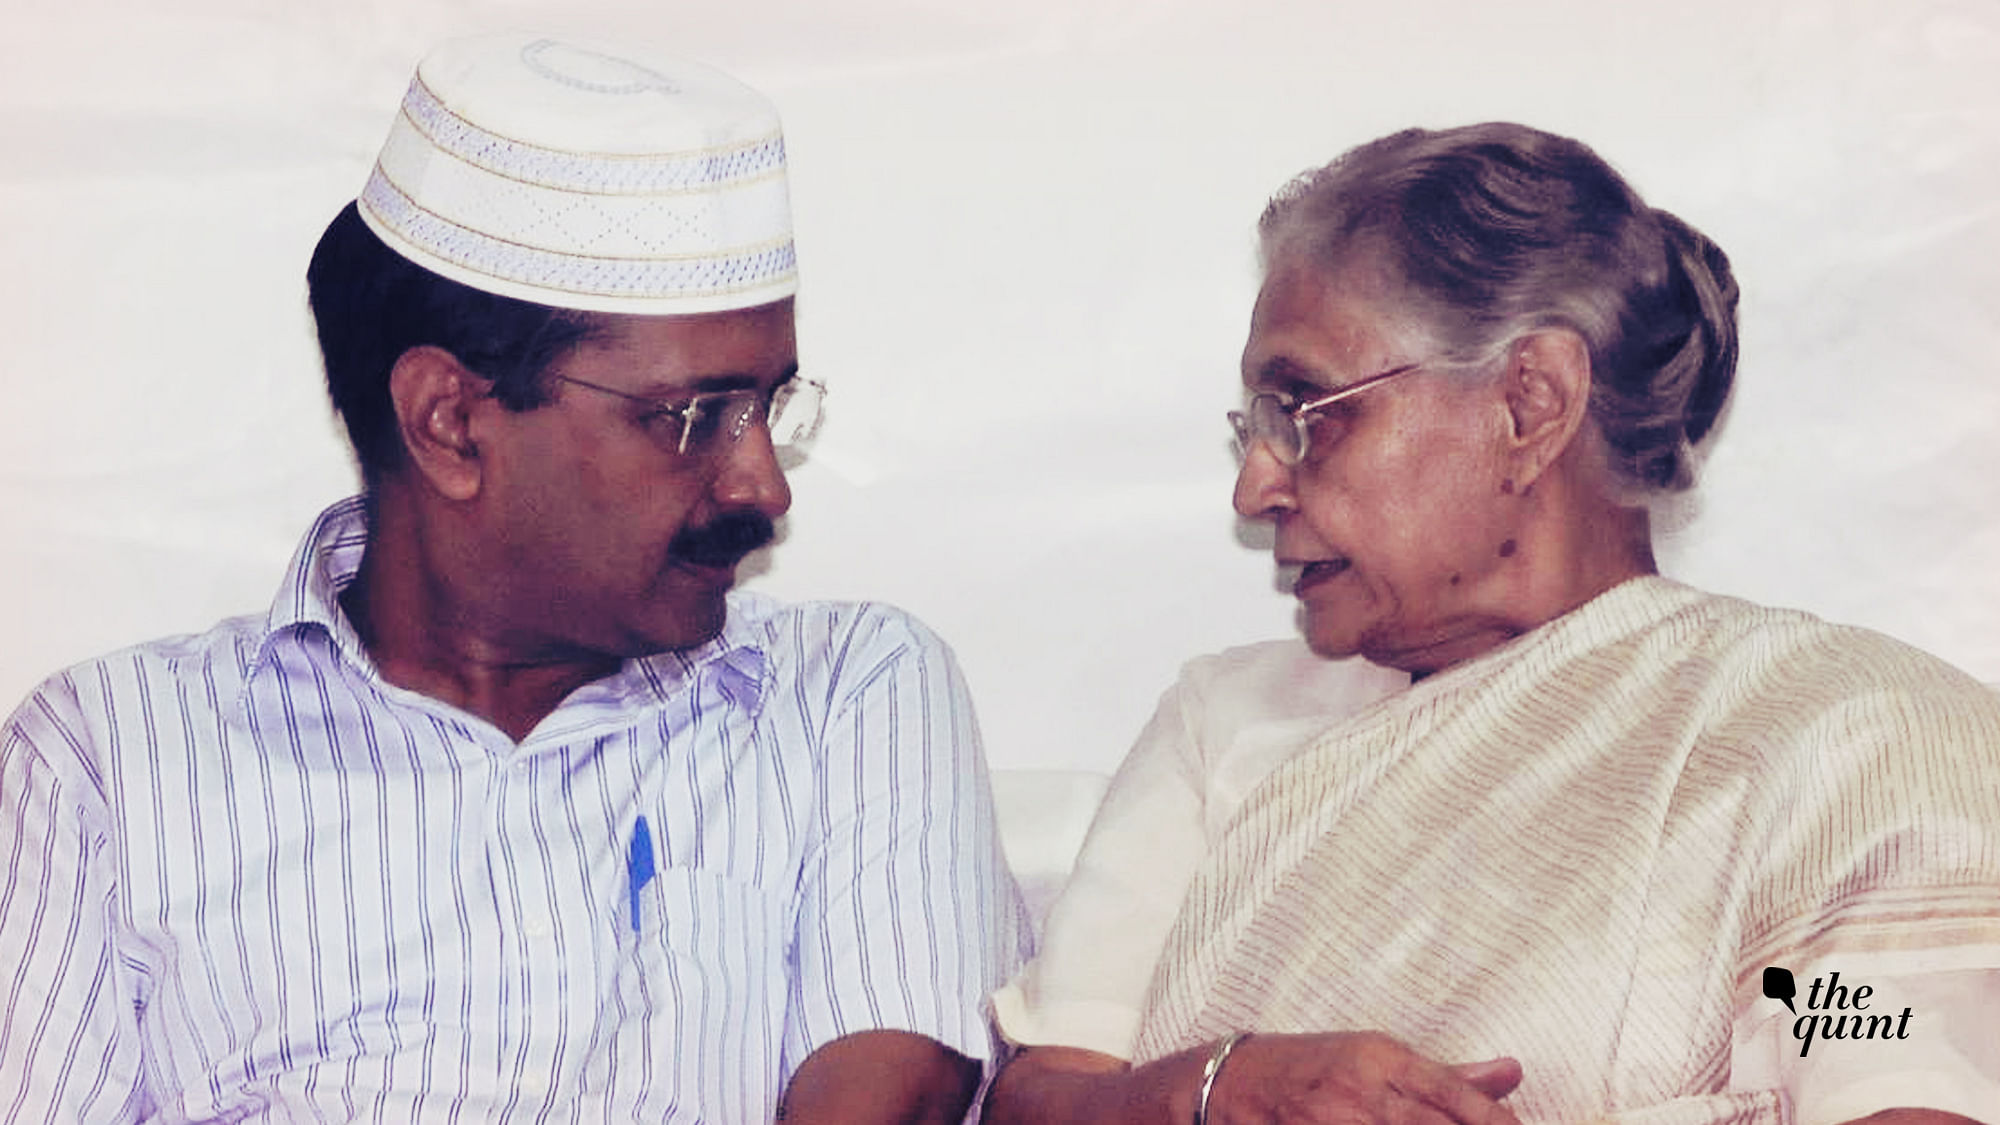 What really is going on – what are the sticky points and backroom considerations preventing (or promoting) an alliance between AAP and Congress in Delhi?